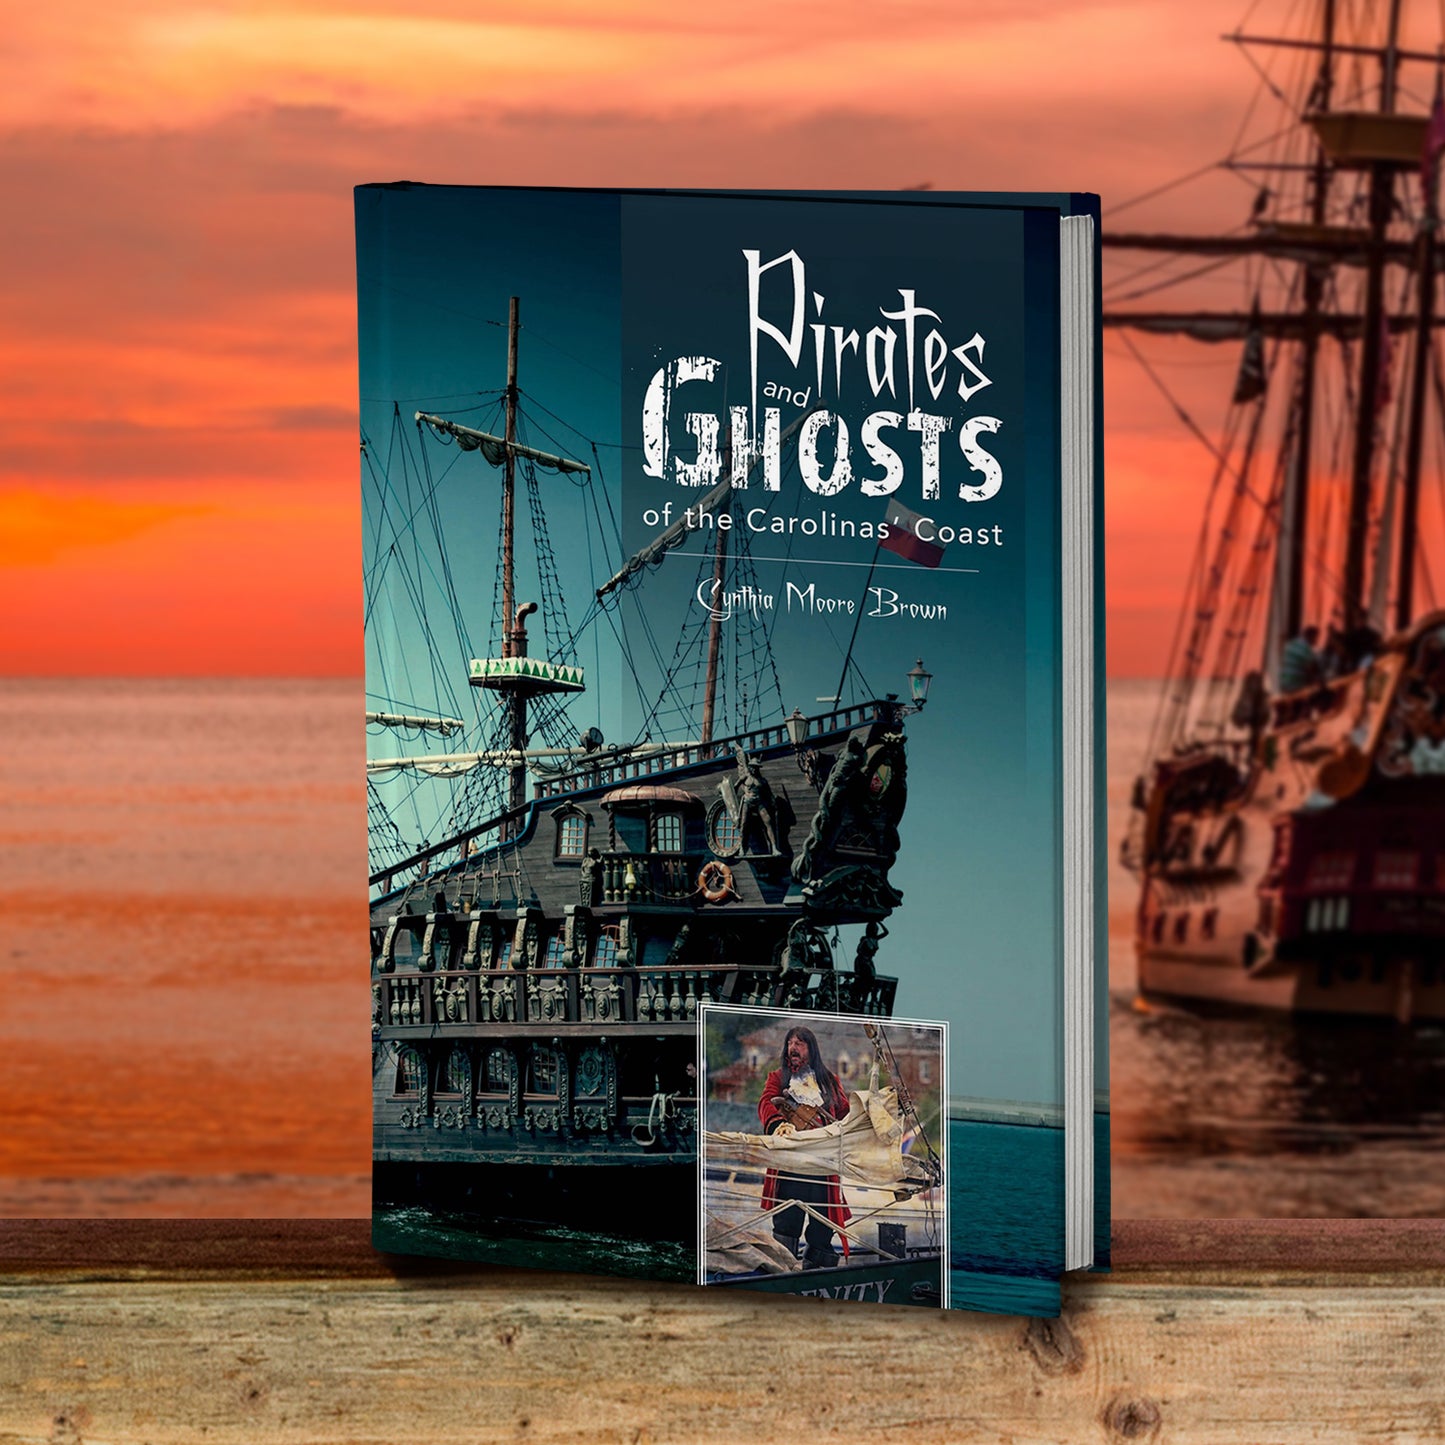 An image of a book standing on a beach, with a sunset sky above it. On the right is a wooden ship. On the cover is old pirate ship on the sea. At the top of the cover in white text is "Pirates and ghosts of the carolina's coast." At the bottom of the cover is an inset image of a man dressed in pirate clothes, standing in front of a folded sail.